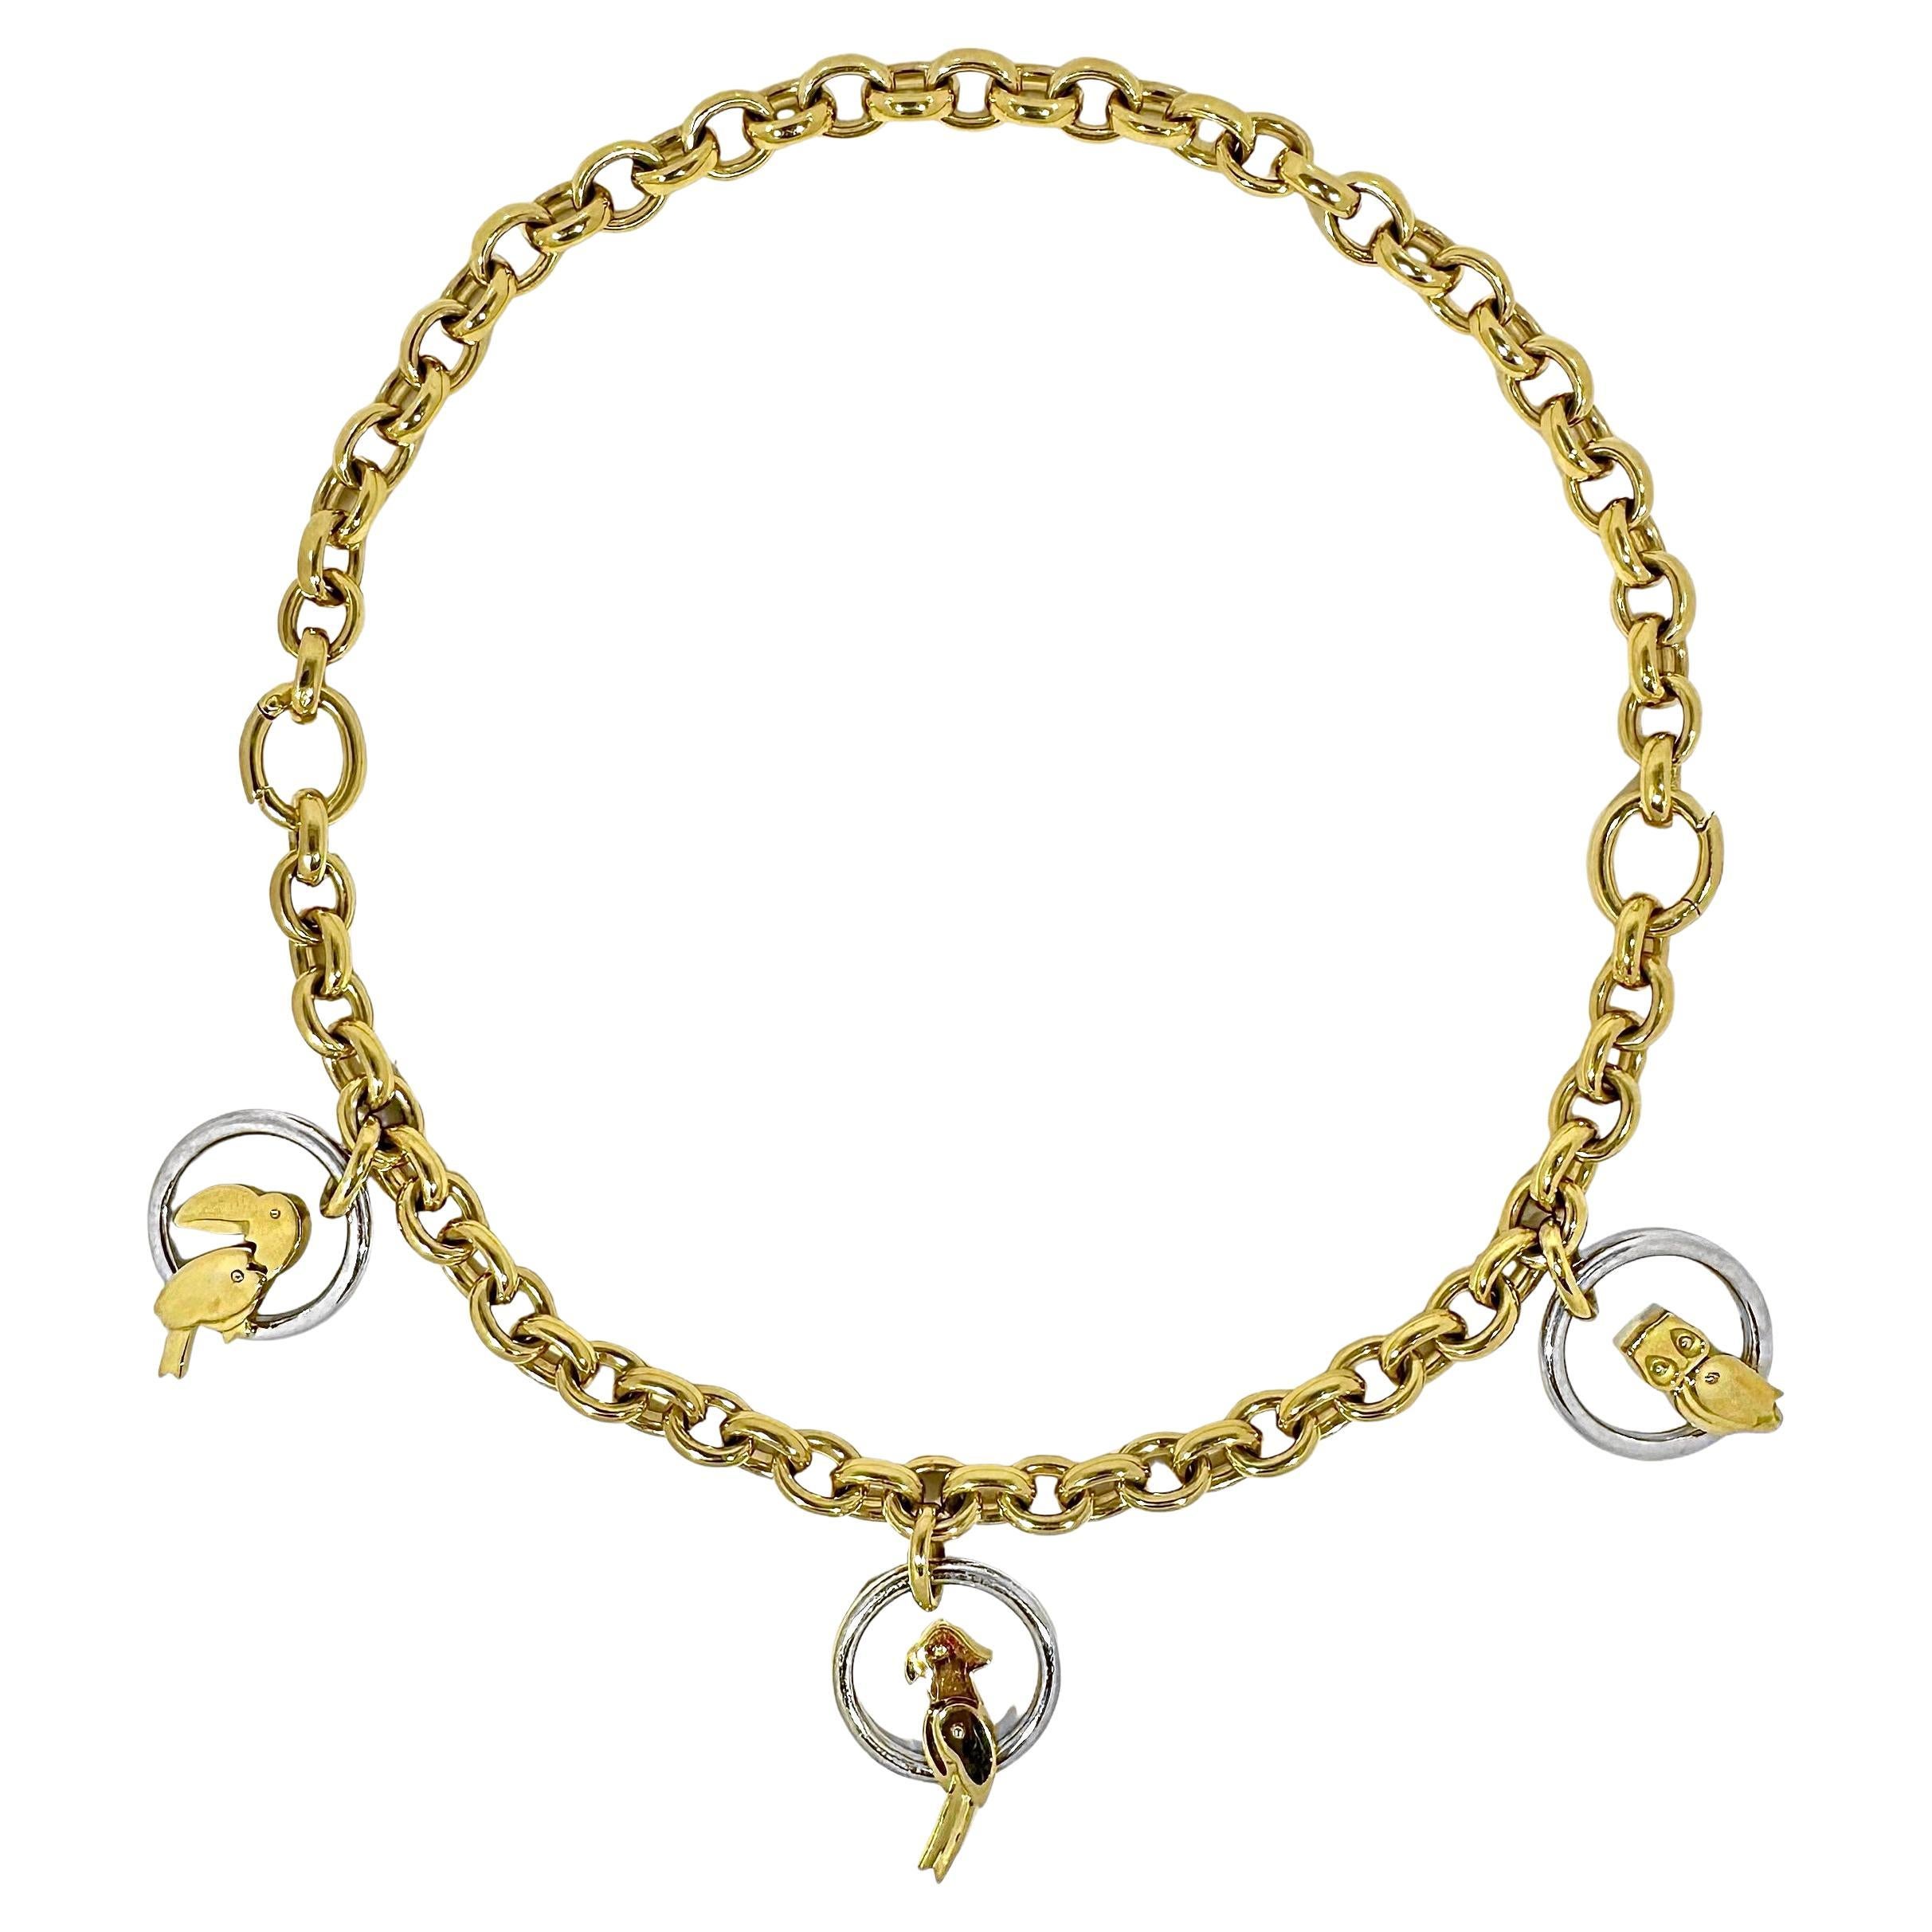 18k Gold 15 Inch Necklace with Aviary Theme Made from 2 Bracelets by Pomellato 